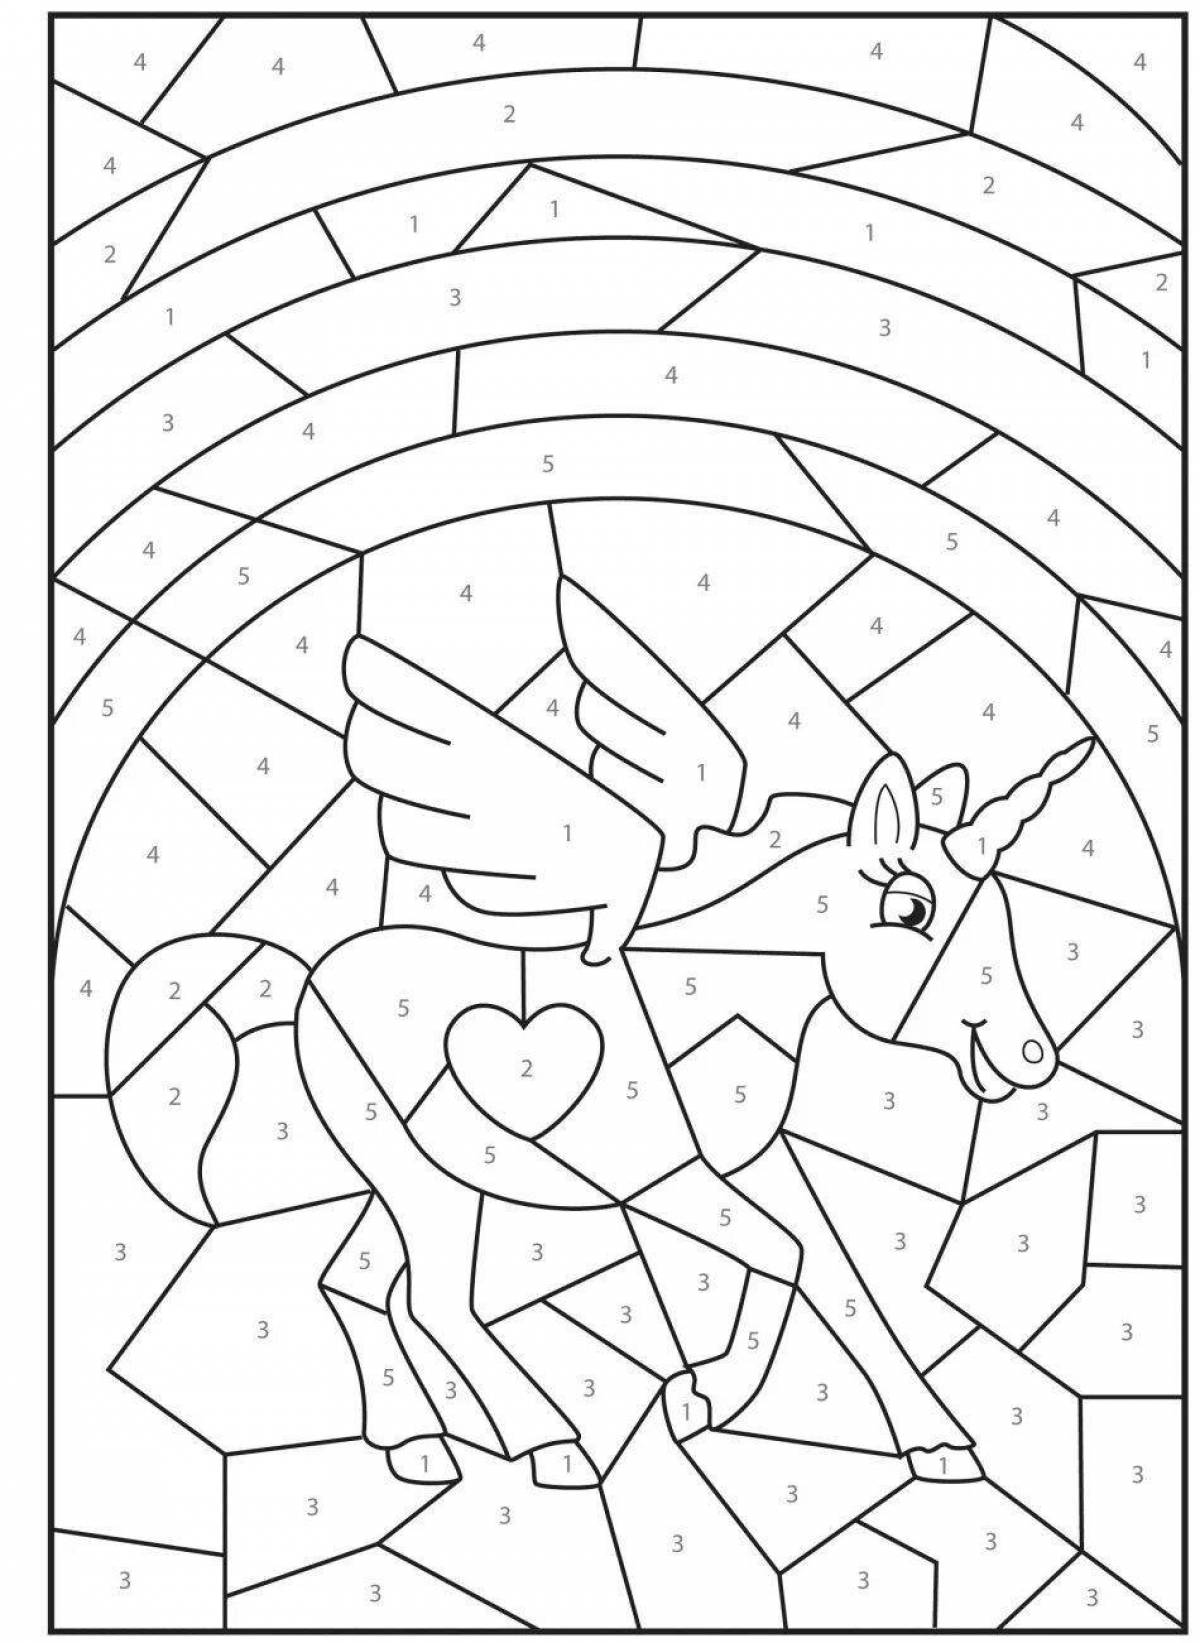 Fun easy-by-numbers coloring book